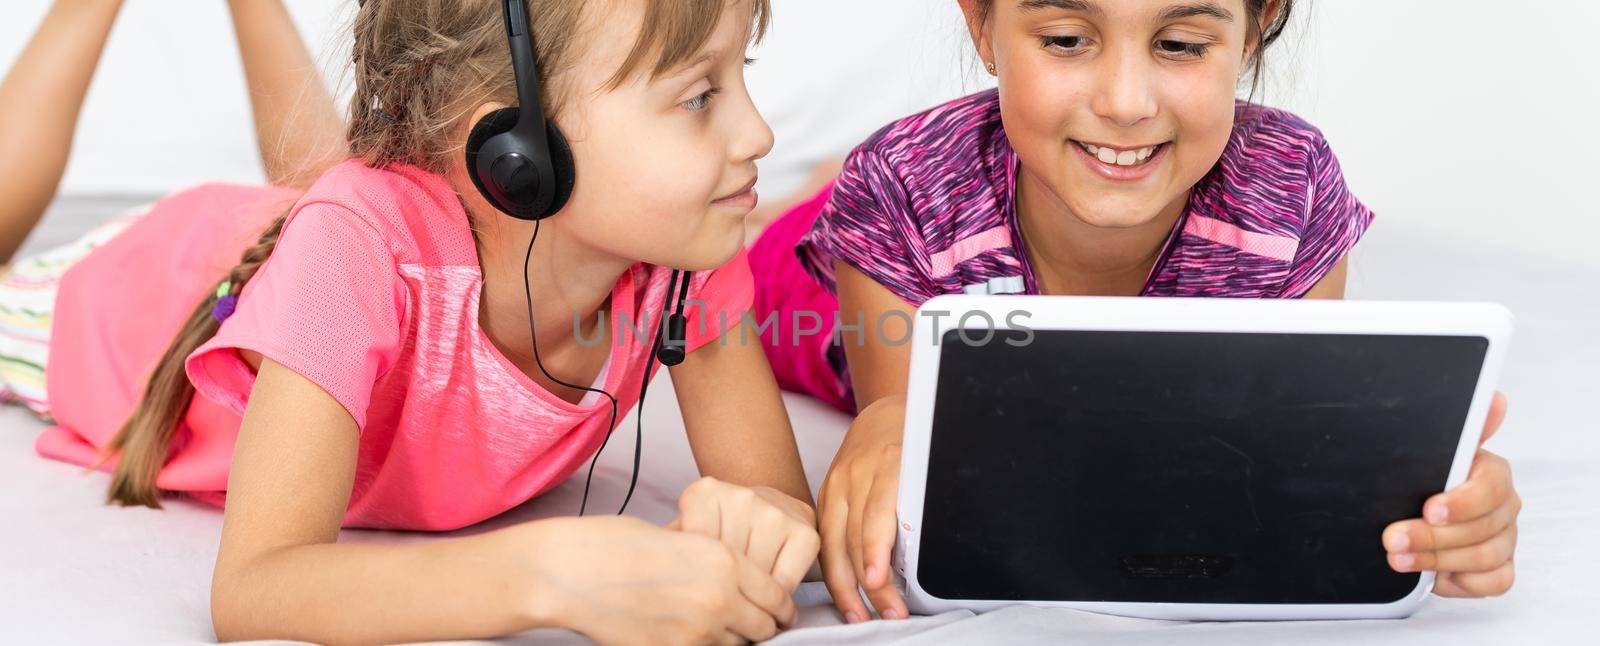 Two cute little girls are using a digital tablet and smiling while lying on bed in children's room.